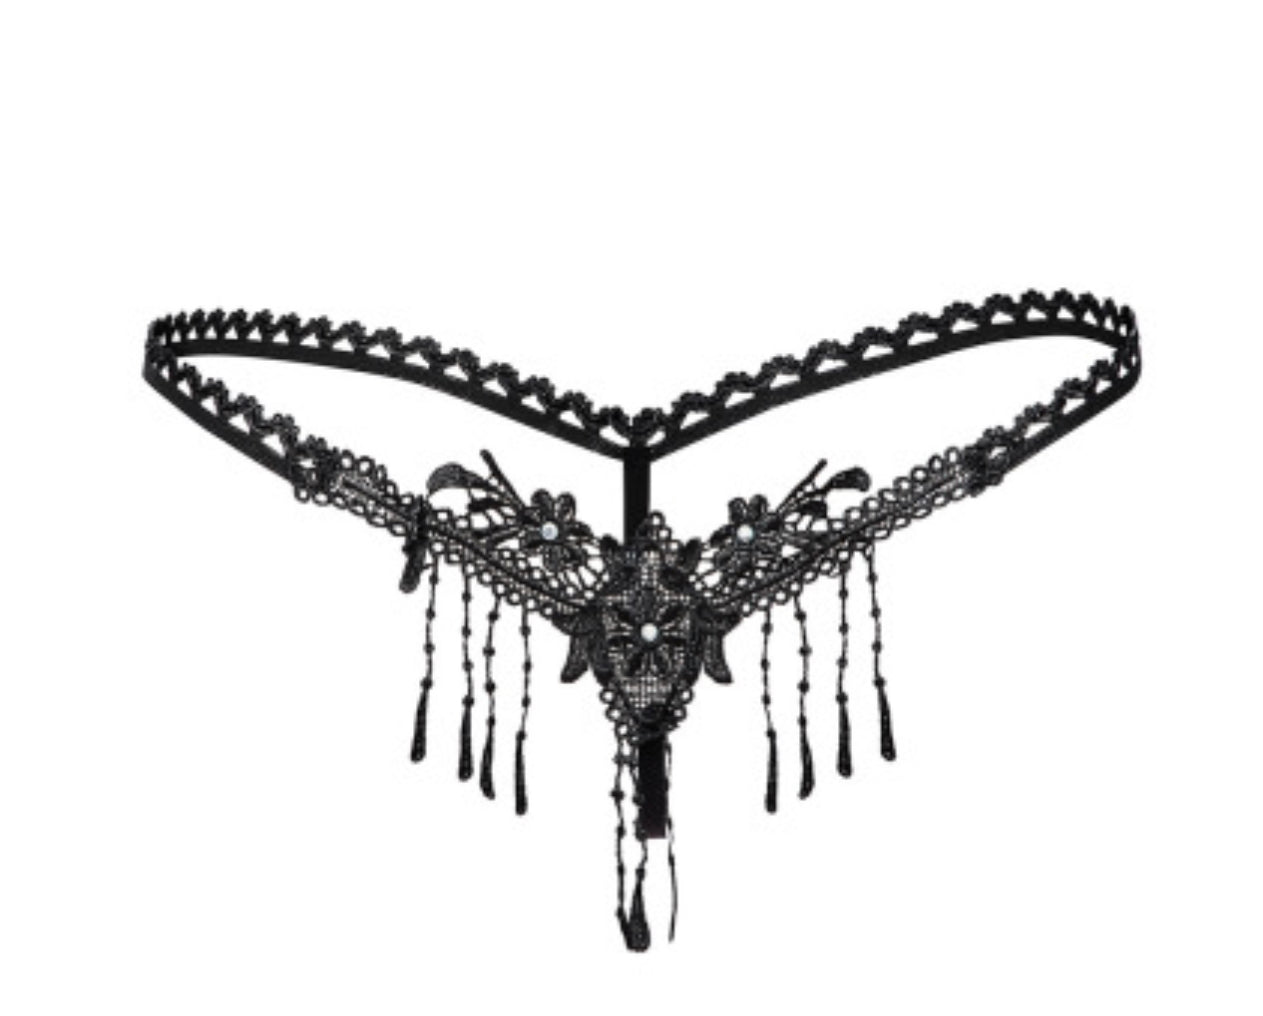 Bead Chain G-string, crotchless pearl panties, crotchless panties, cro – La  Belle Fantastique